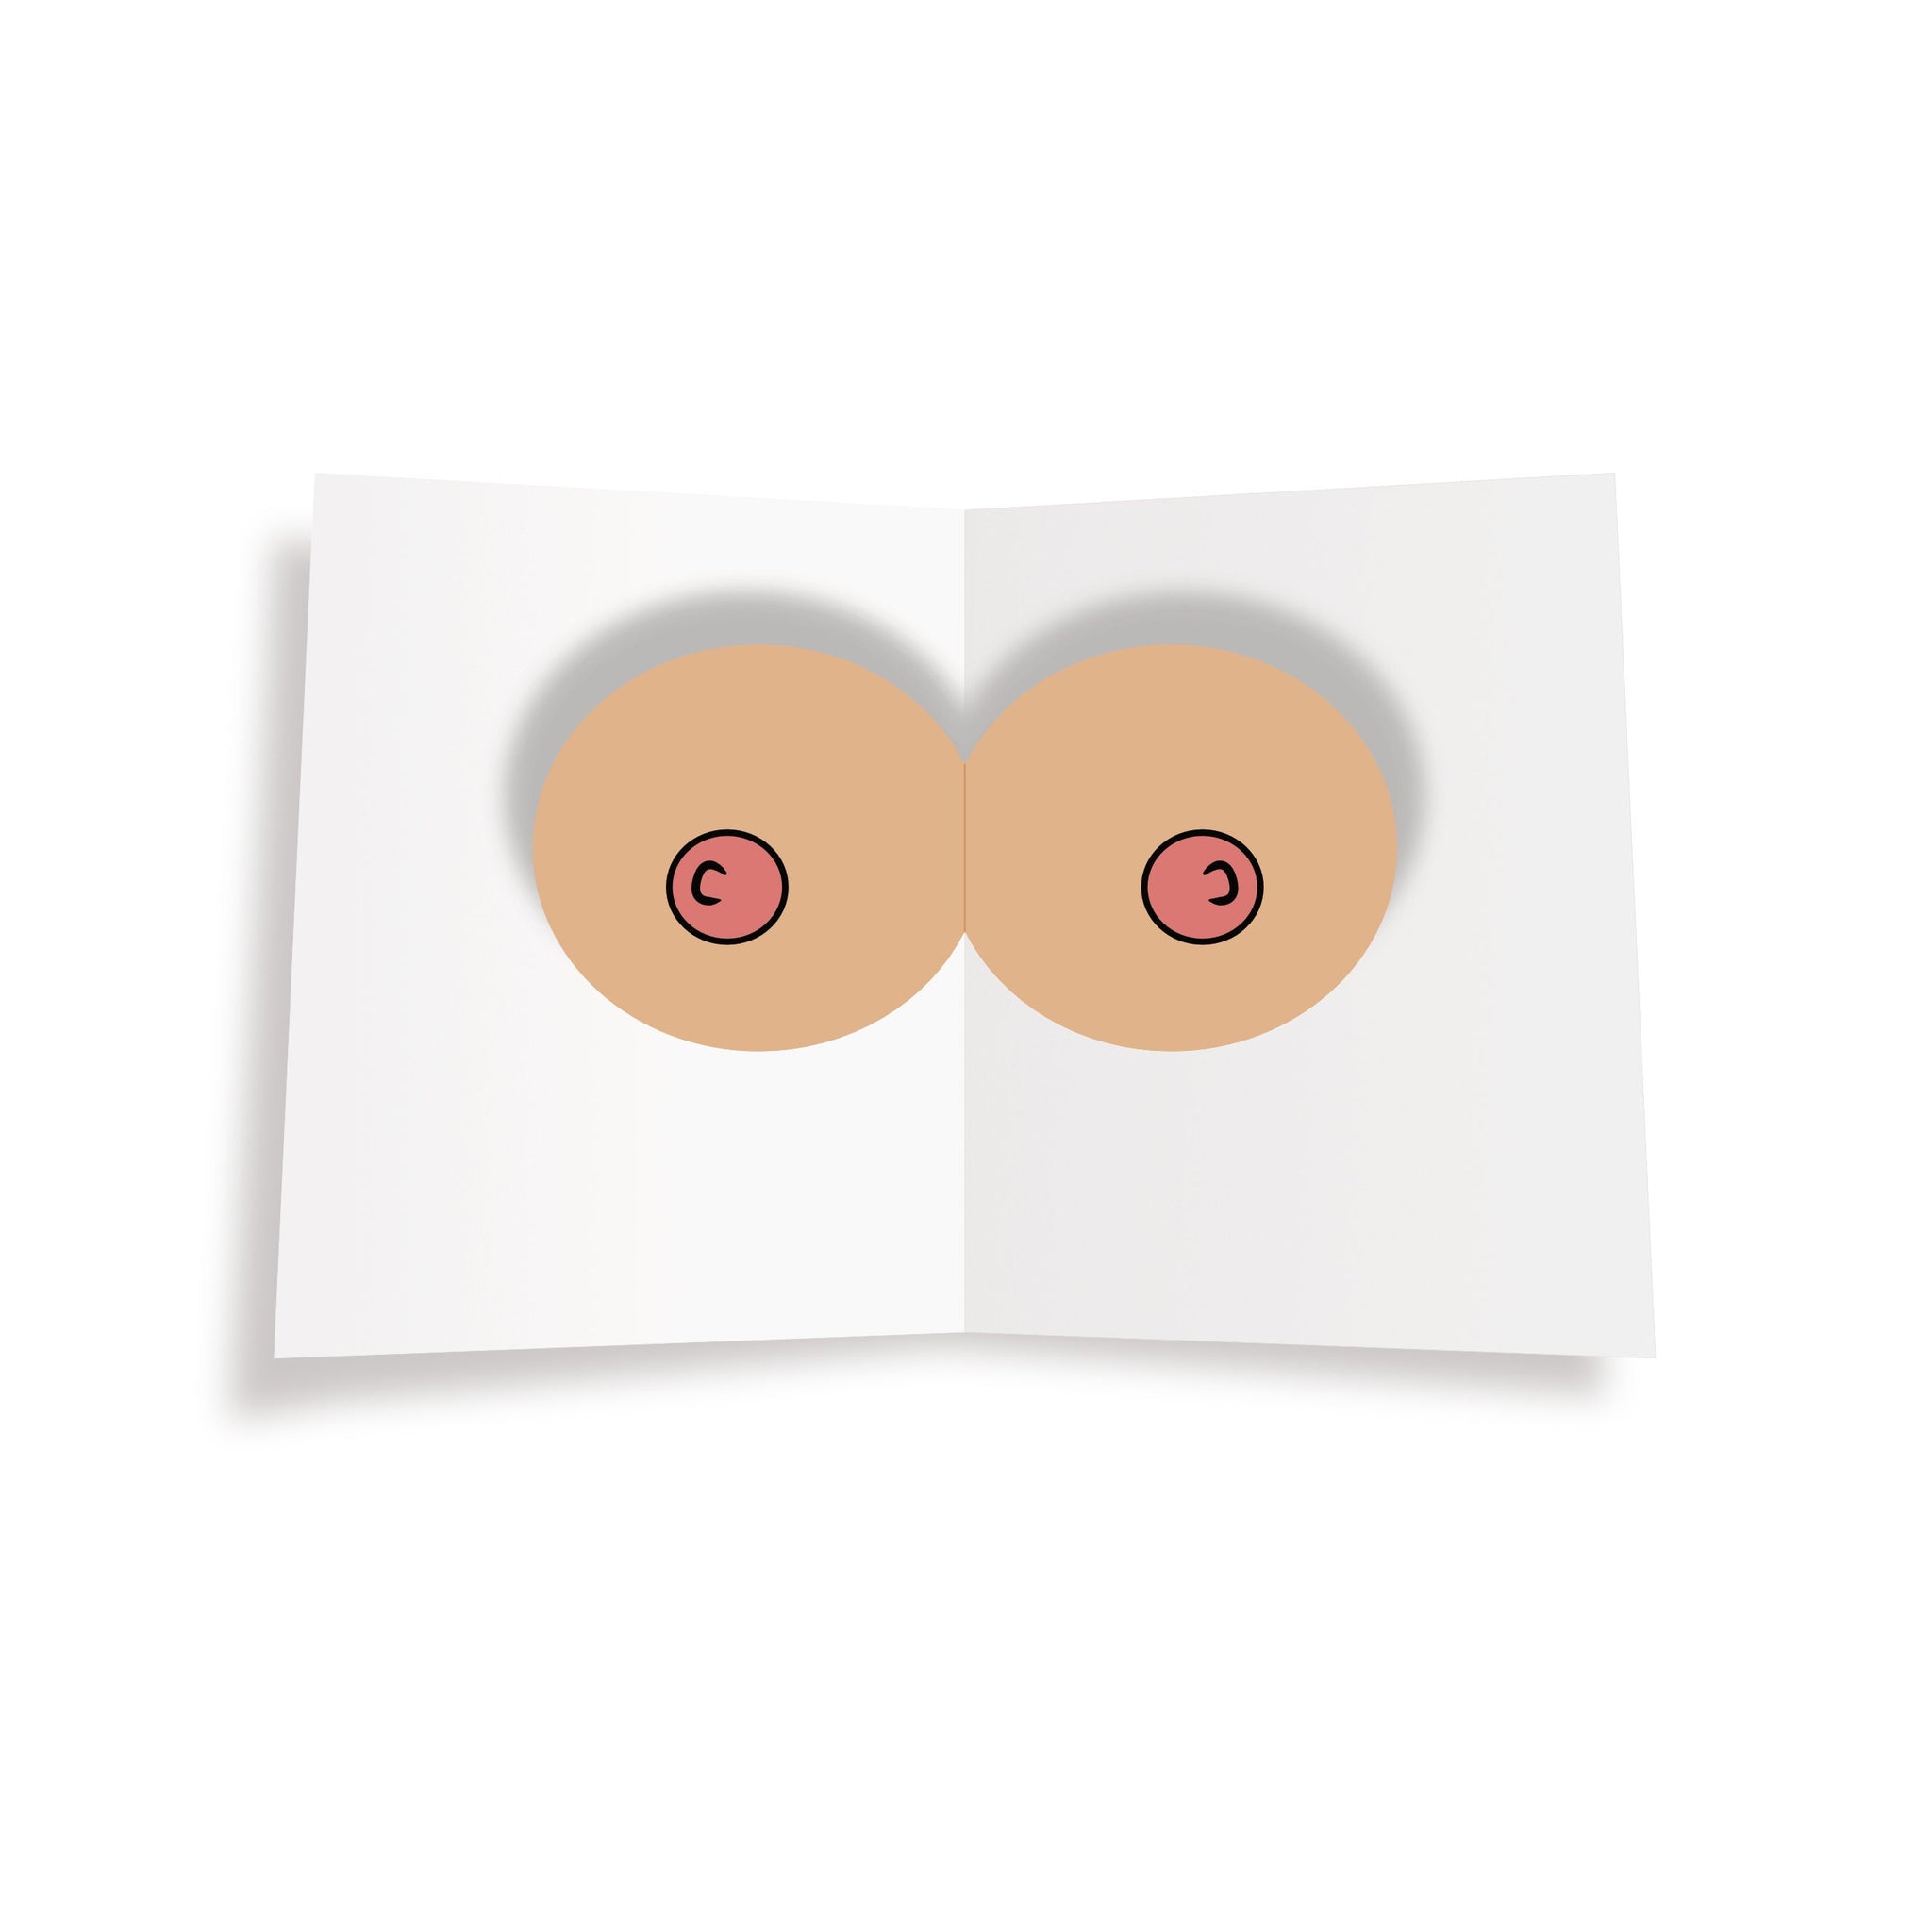 You're The Tits - Pop Up Boob Card - Dicks By Mail - Anonymously mail a bag  of dicks